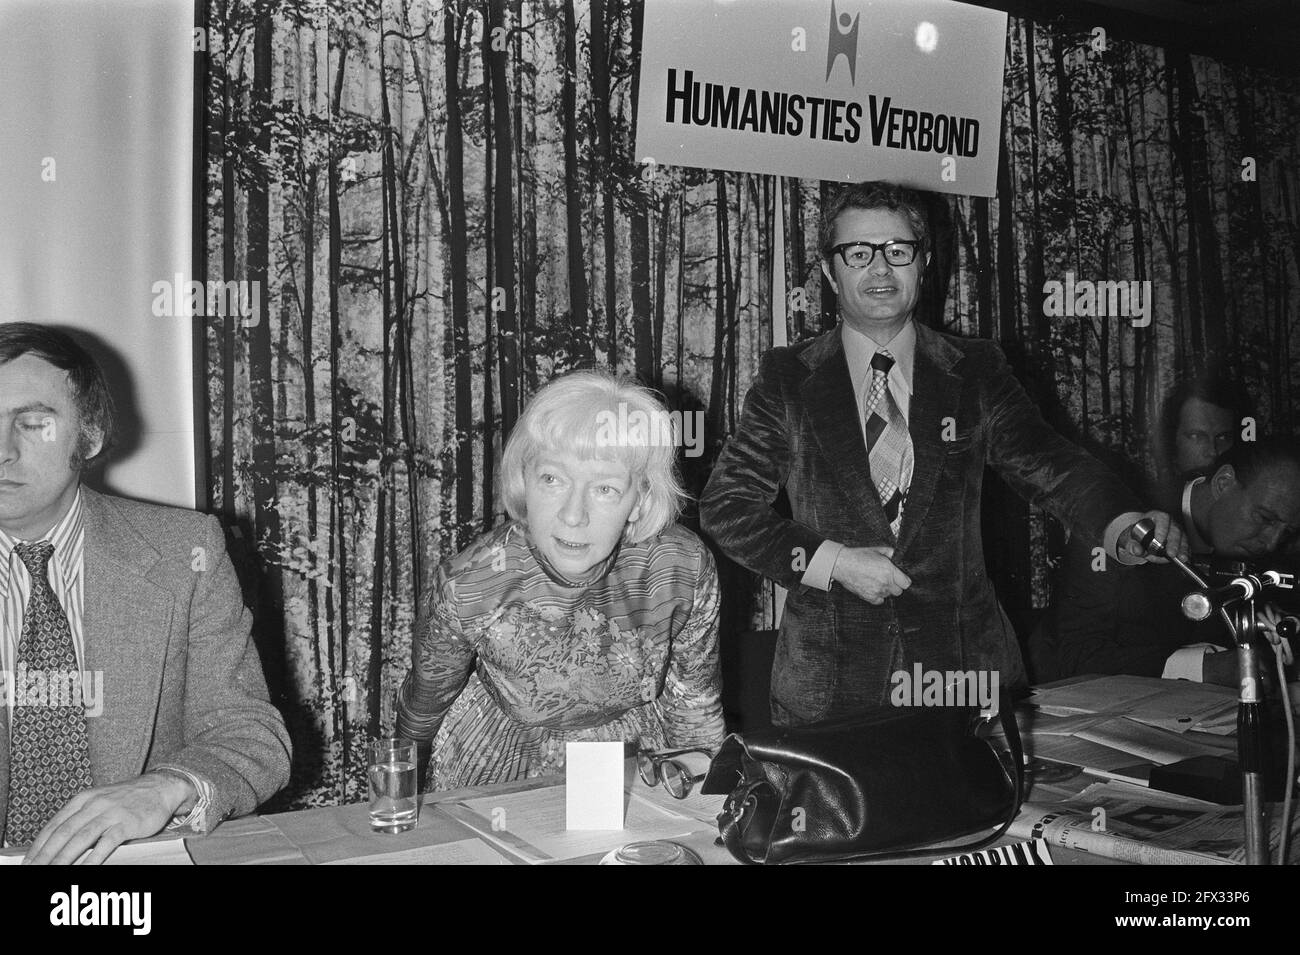 Congress on survival problems of Humanistisch Verbond in Rotterdam; minister Vorrink and mr. M. G. Rood, February 8, 1975, congresses, The Netherlands, 20th century press agency photo, news to remember, documentary, historic photography 1945-1990, visual stories, human history of the Twentieth Century, capturing moments in time Stock Photo